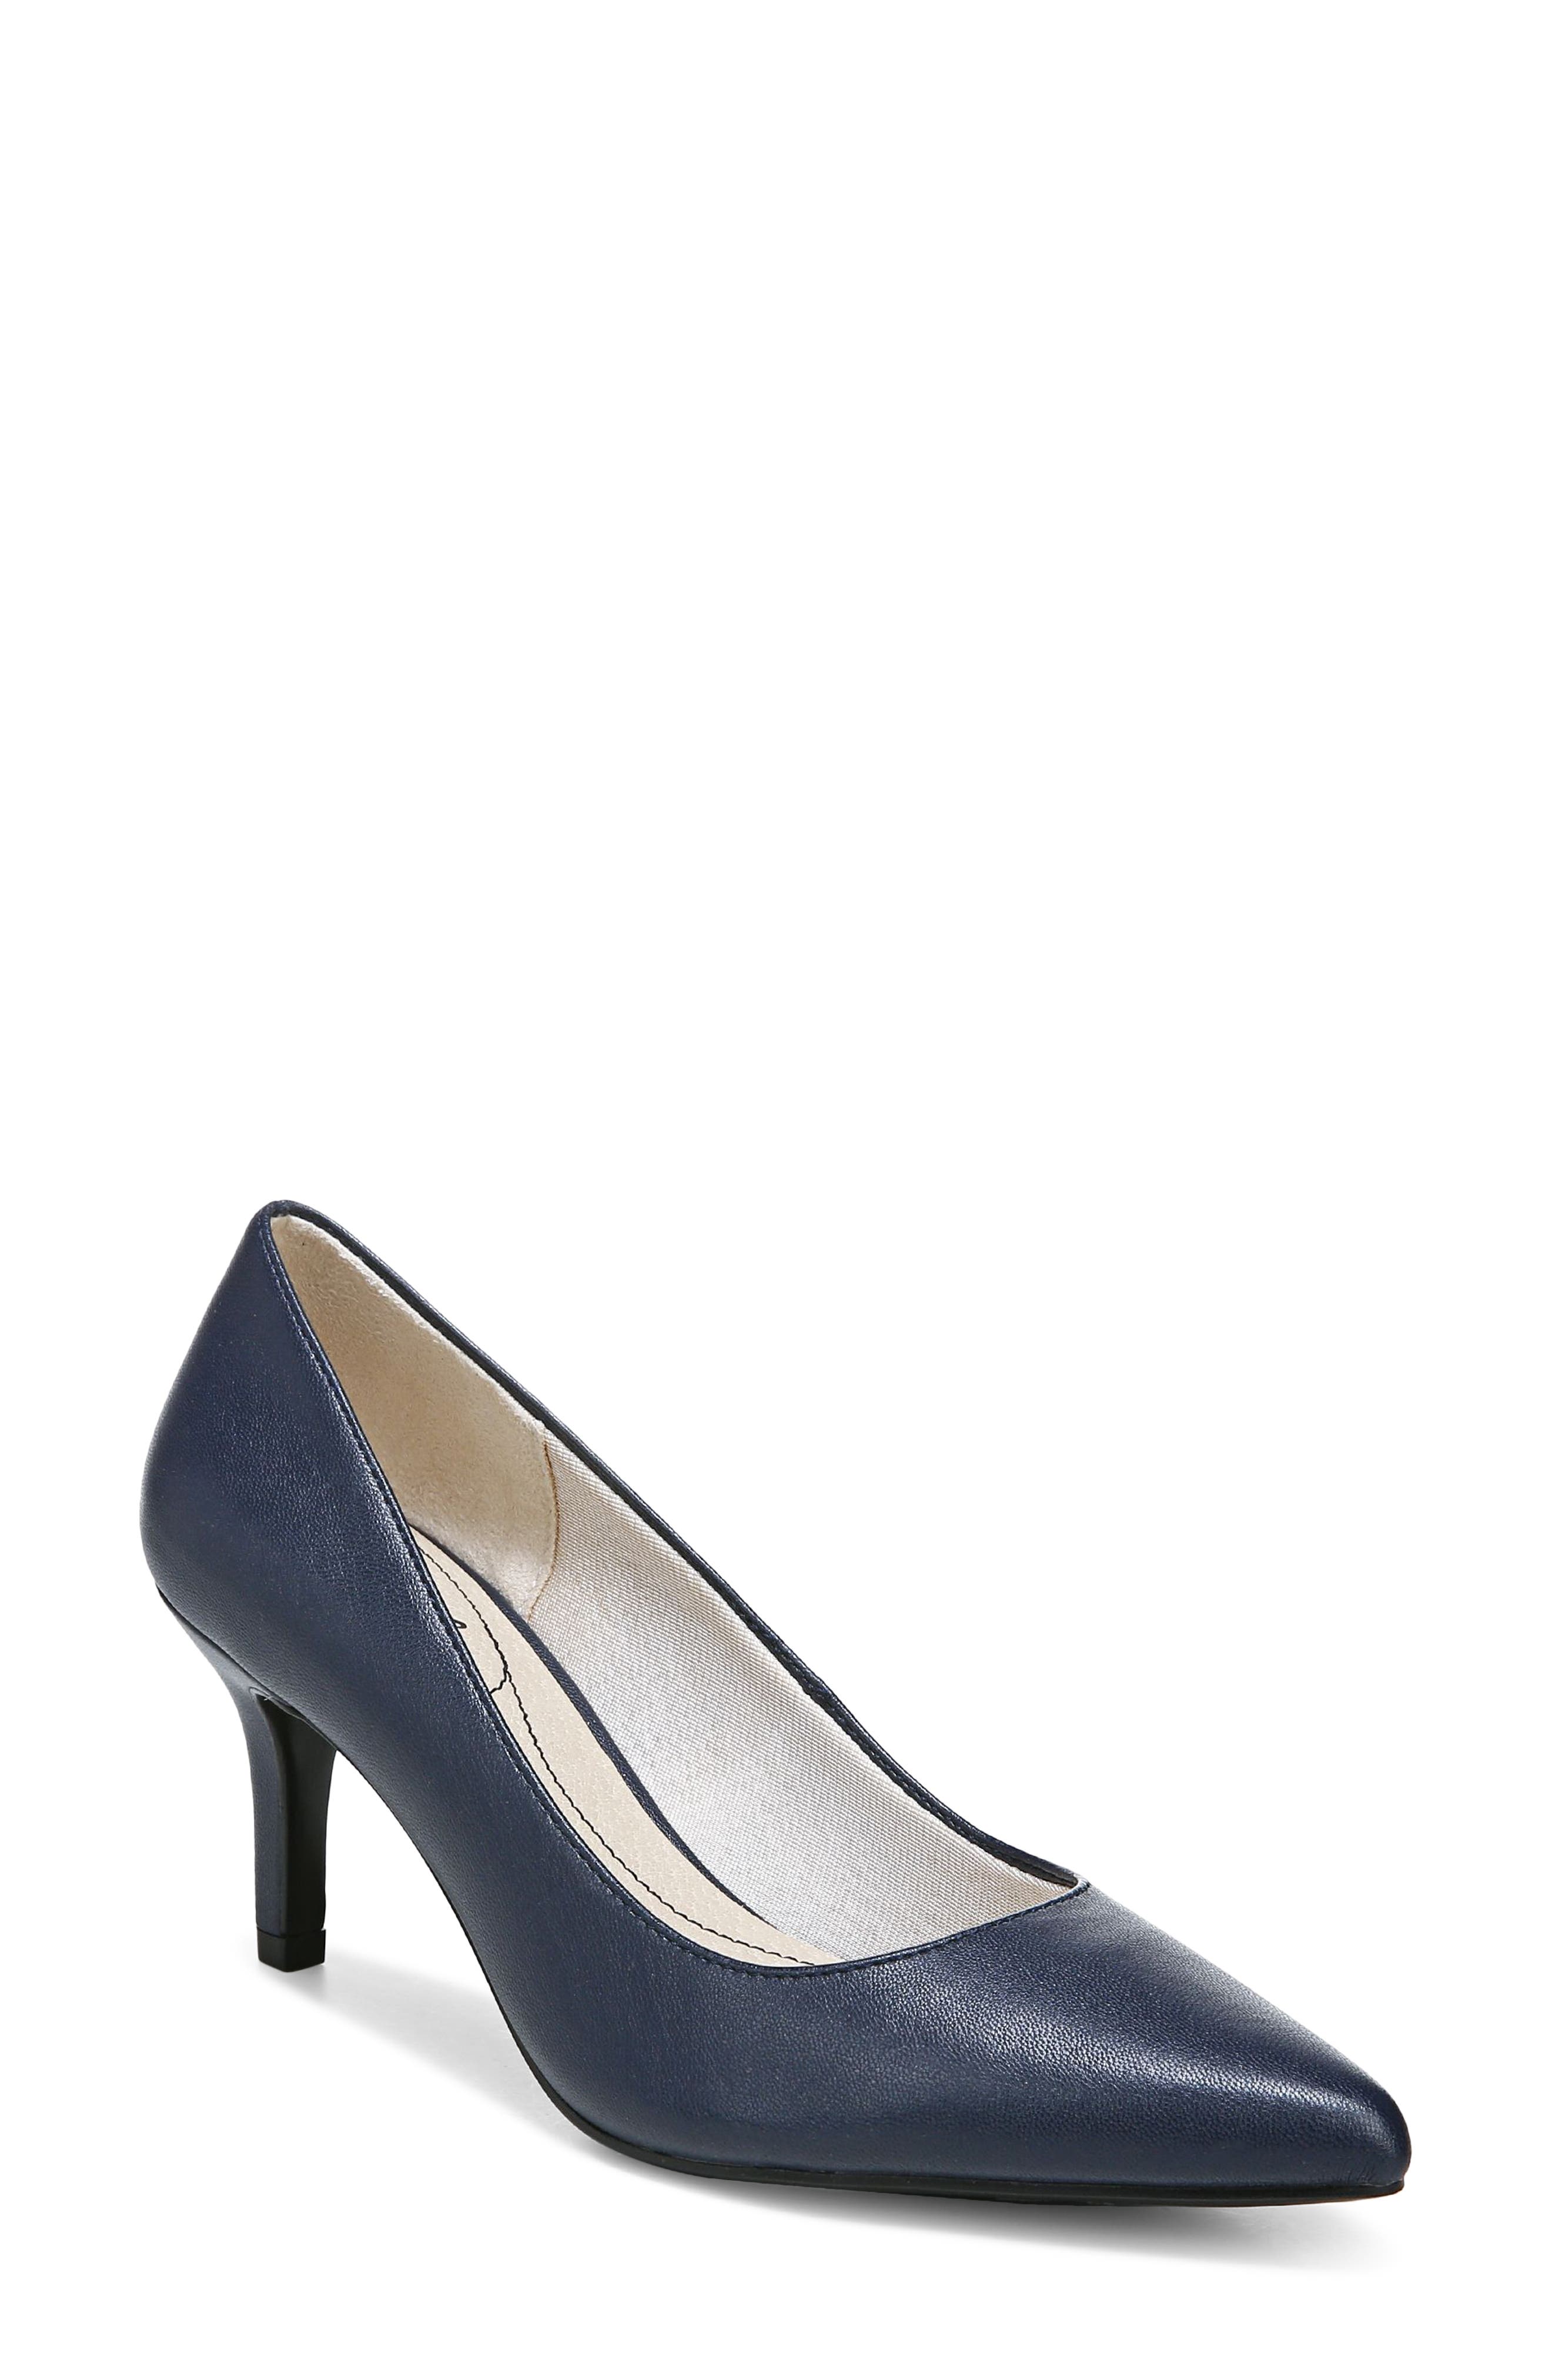 navy blue dress shoes for women